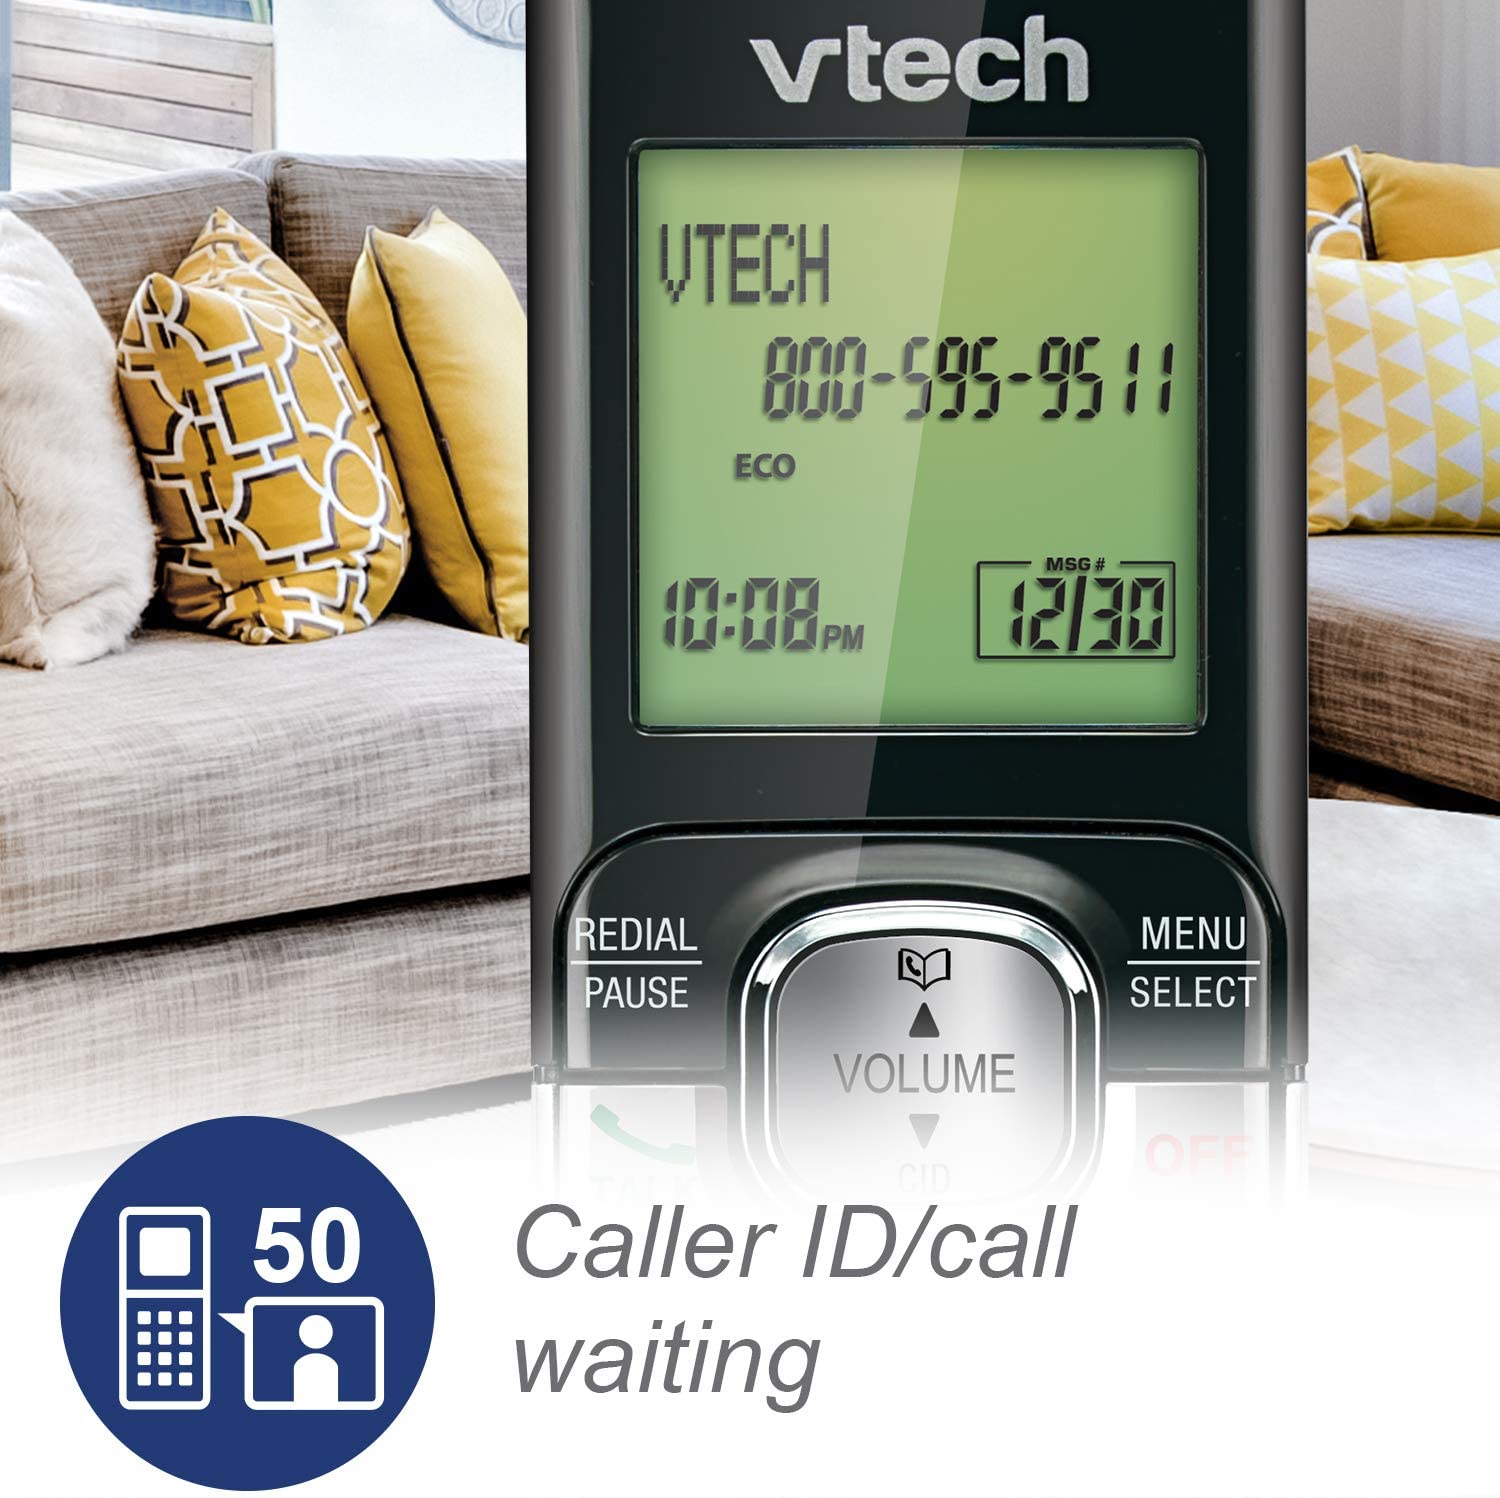 VTech CS6529-4B 4-Handset DECT 6.0 Cordless Phone, Blue/Green/Red/Silver - with Answering System and Caller ID/Call Waiting